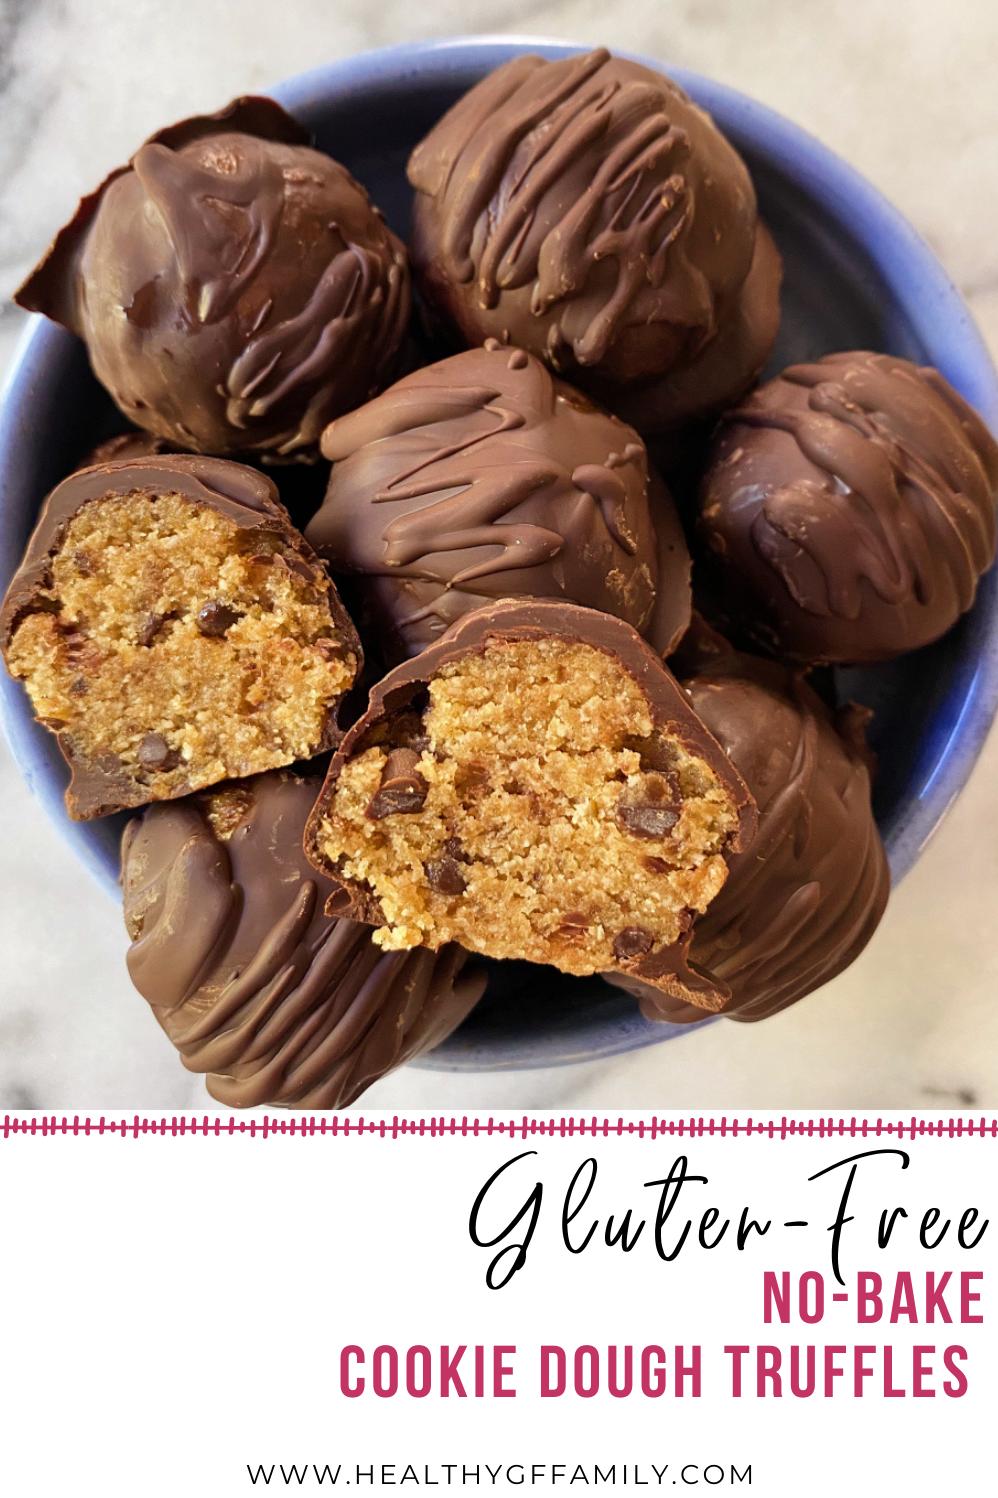  These chocolate balls are dairy-free too!